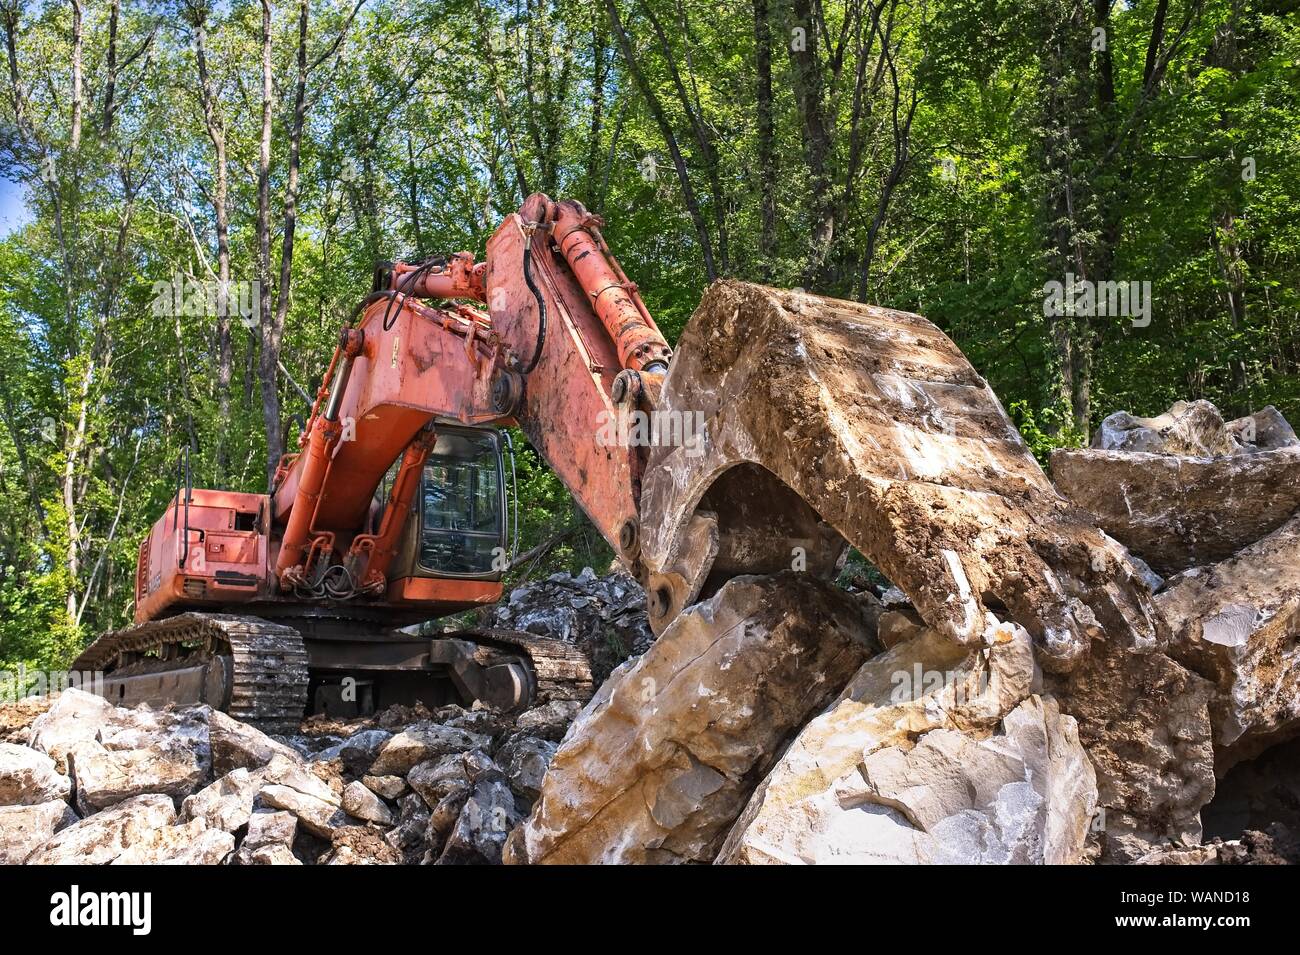 Excavator loader machine at road construction site Stock Photo